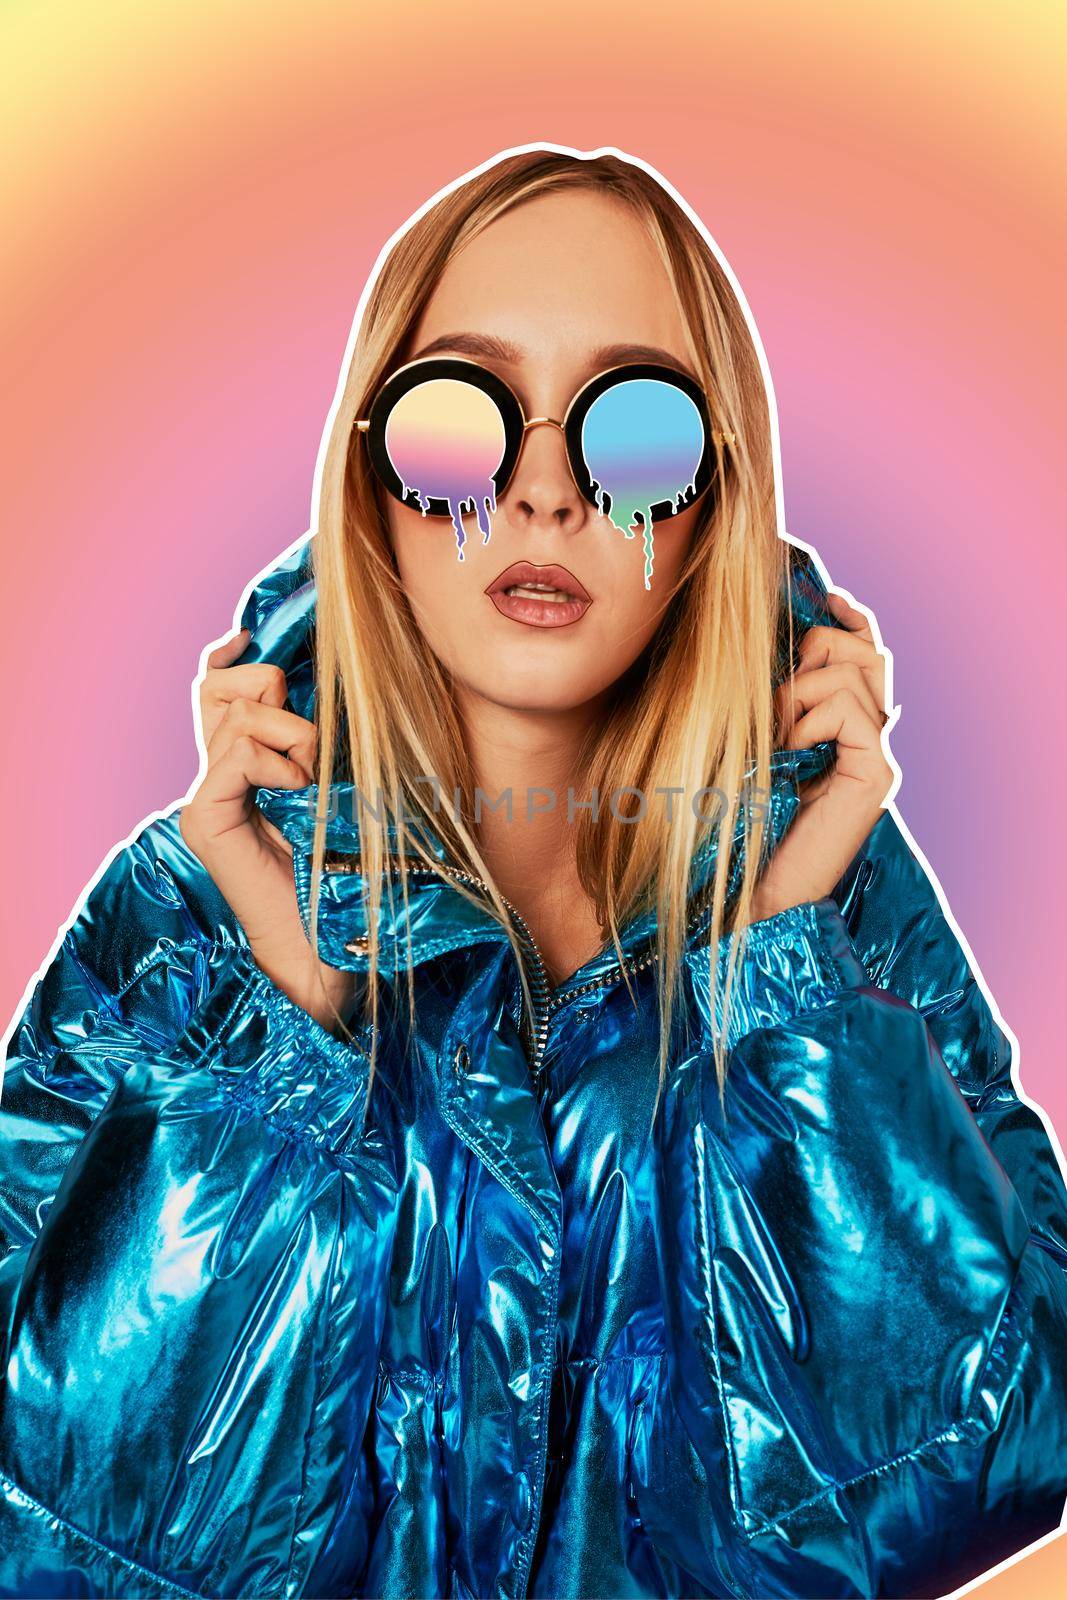 Close-up fashion portrait of an attractive female in a warm shiny jacket and cartoon melting glasses, holding her hood and posing against a colorful background of studio. Art collage.